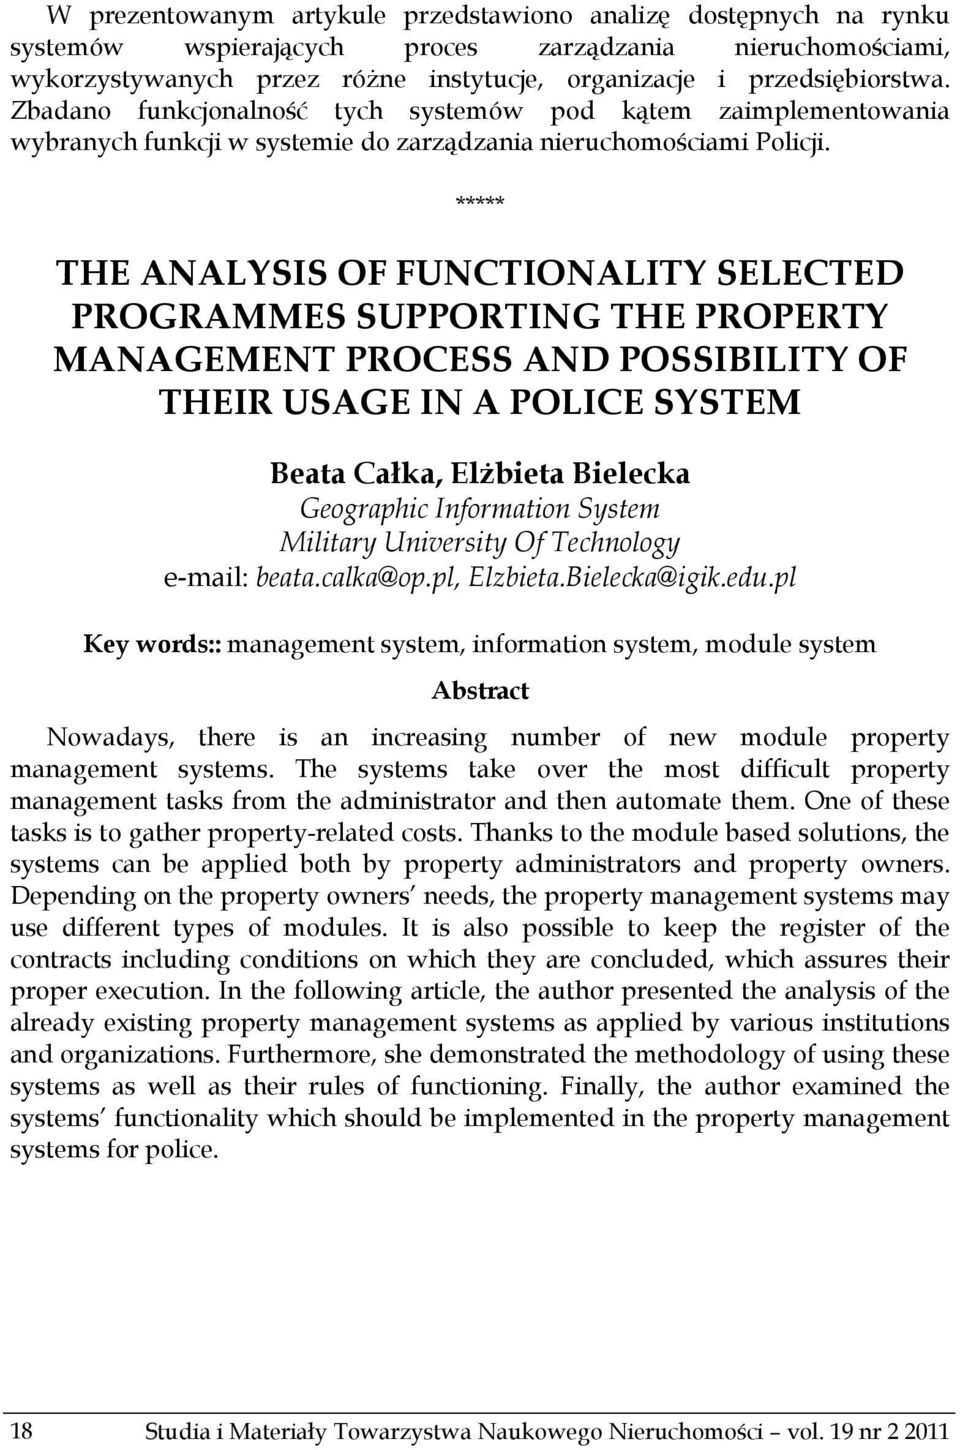 ***** THE ANALYSIS OF FUNCTIONALITY SELECTED PROGRAMMES SUPPORTING THE PROPERTY MANAGEMENT PROCESS AND POSSIBILITY OF THEIR USAGE IN A POLICE SYSTEM Beata Całka, Elżbieta Bielecka Geographic